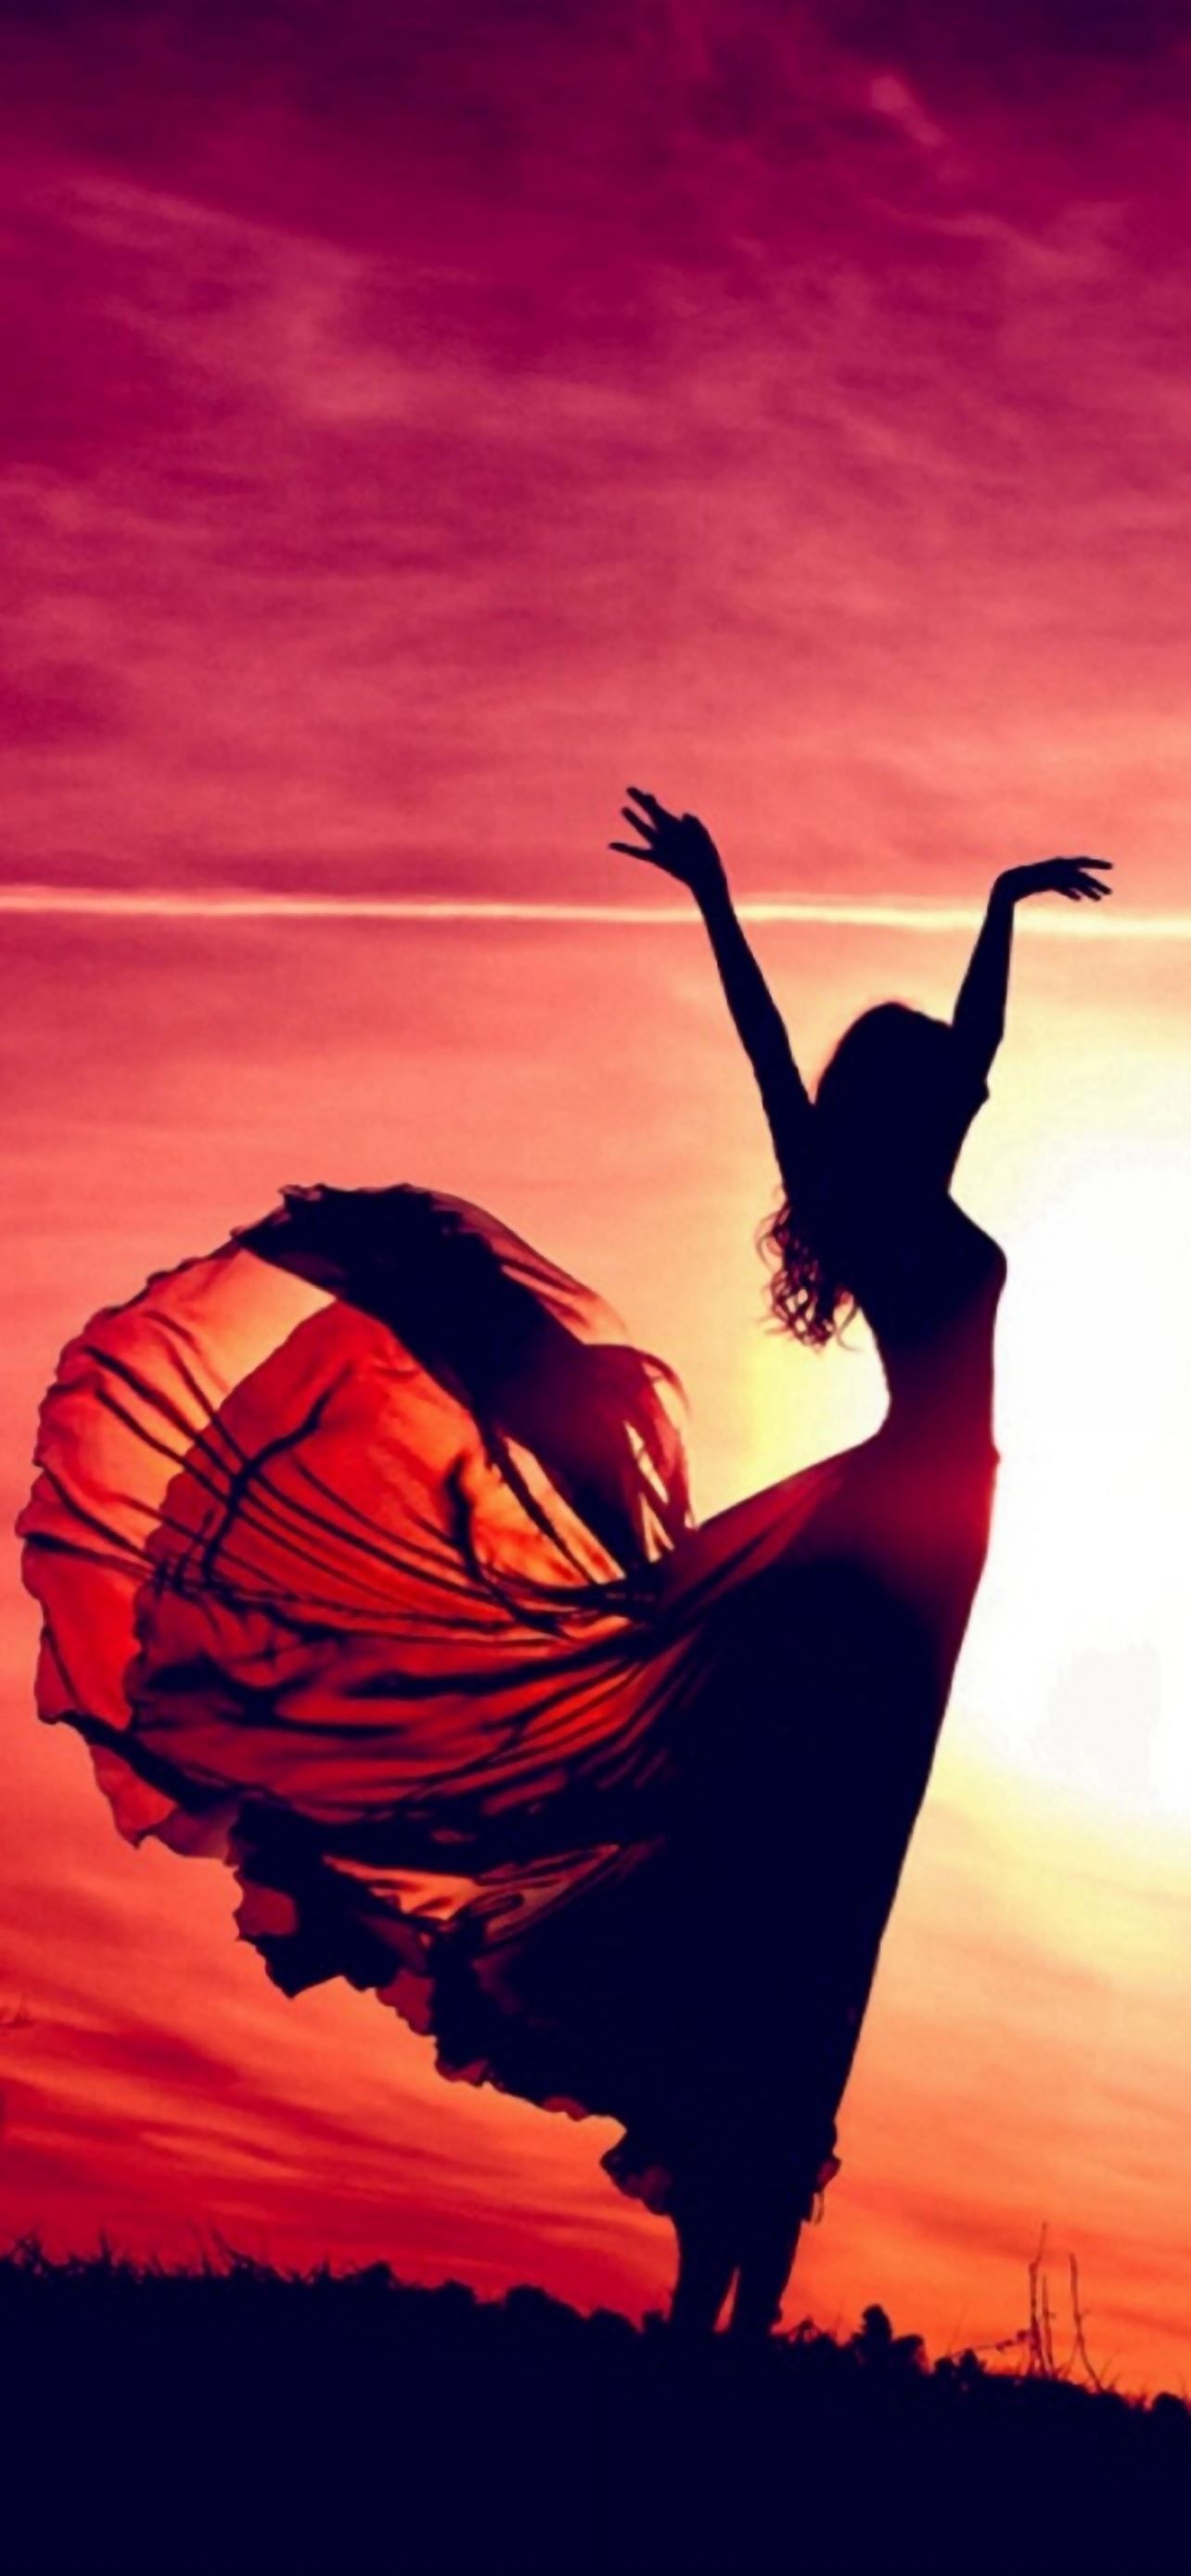 A woman dances in the sunset with her arms in the air. - Sunshine, beautiful, sunlight, dance